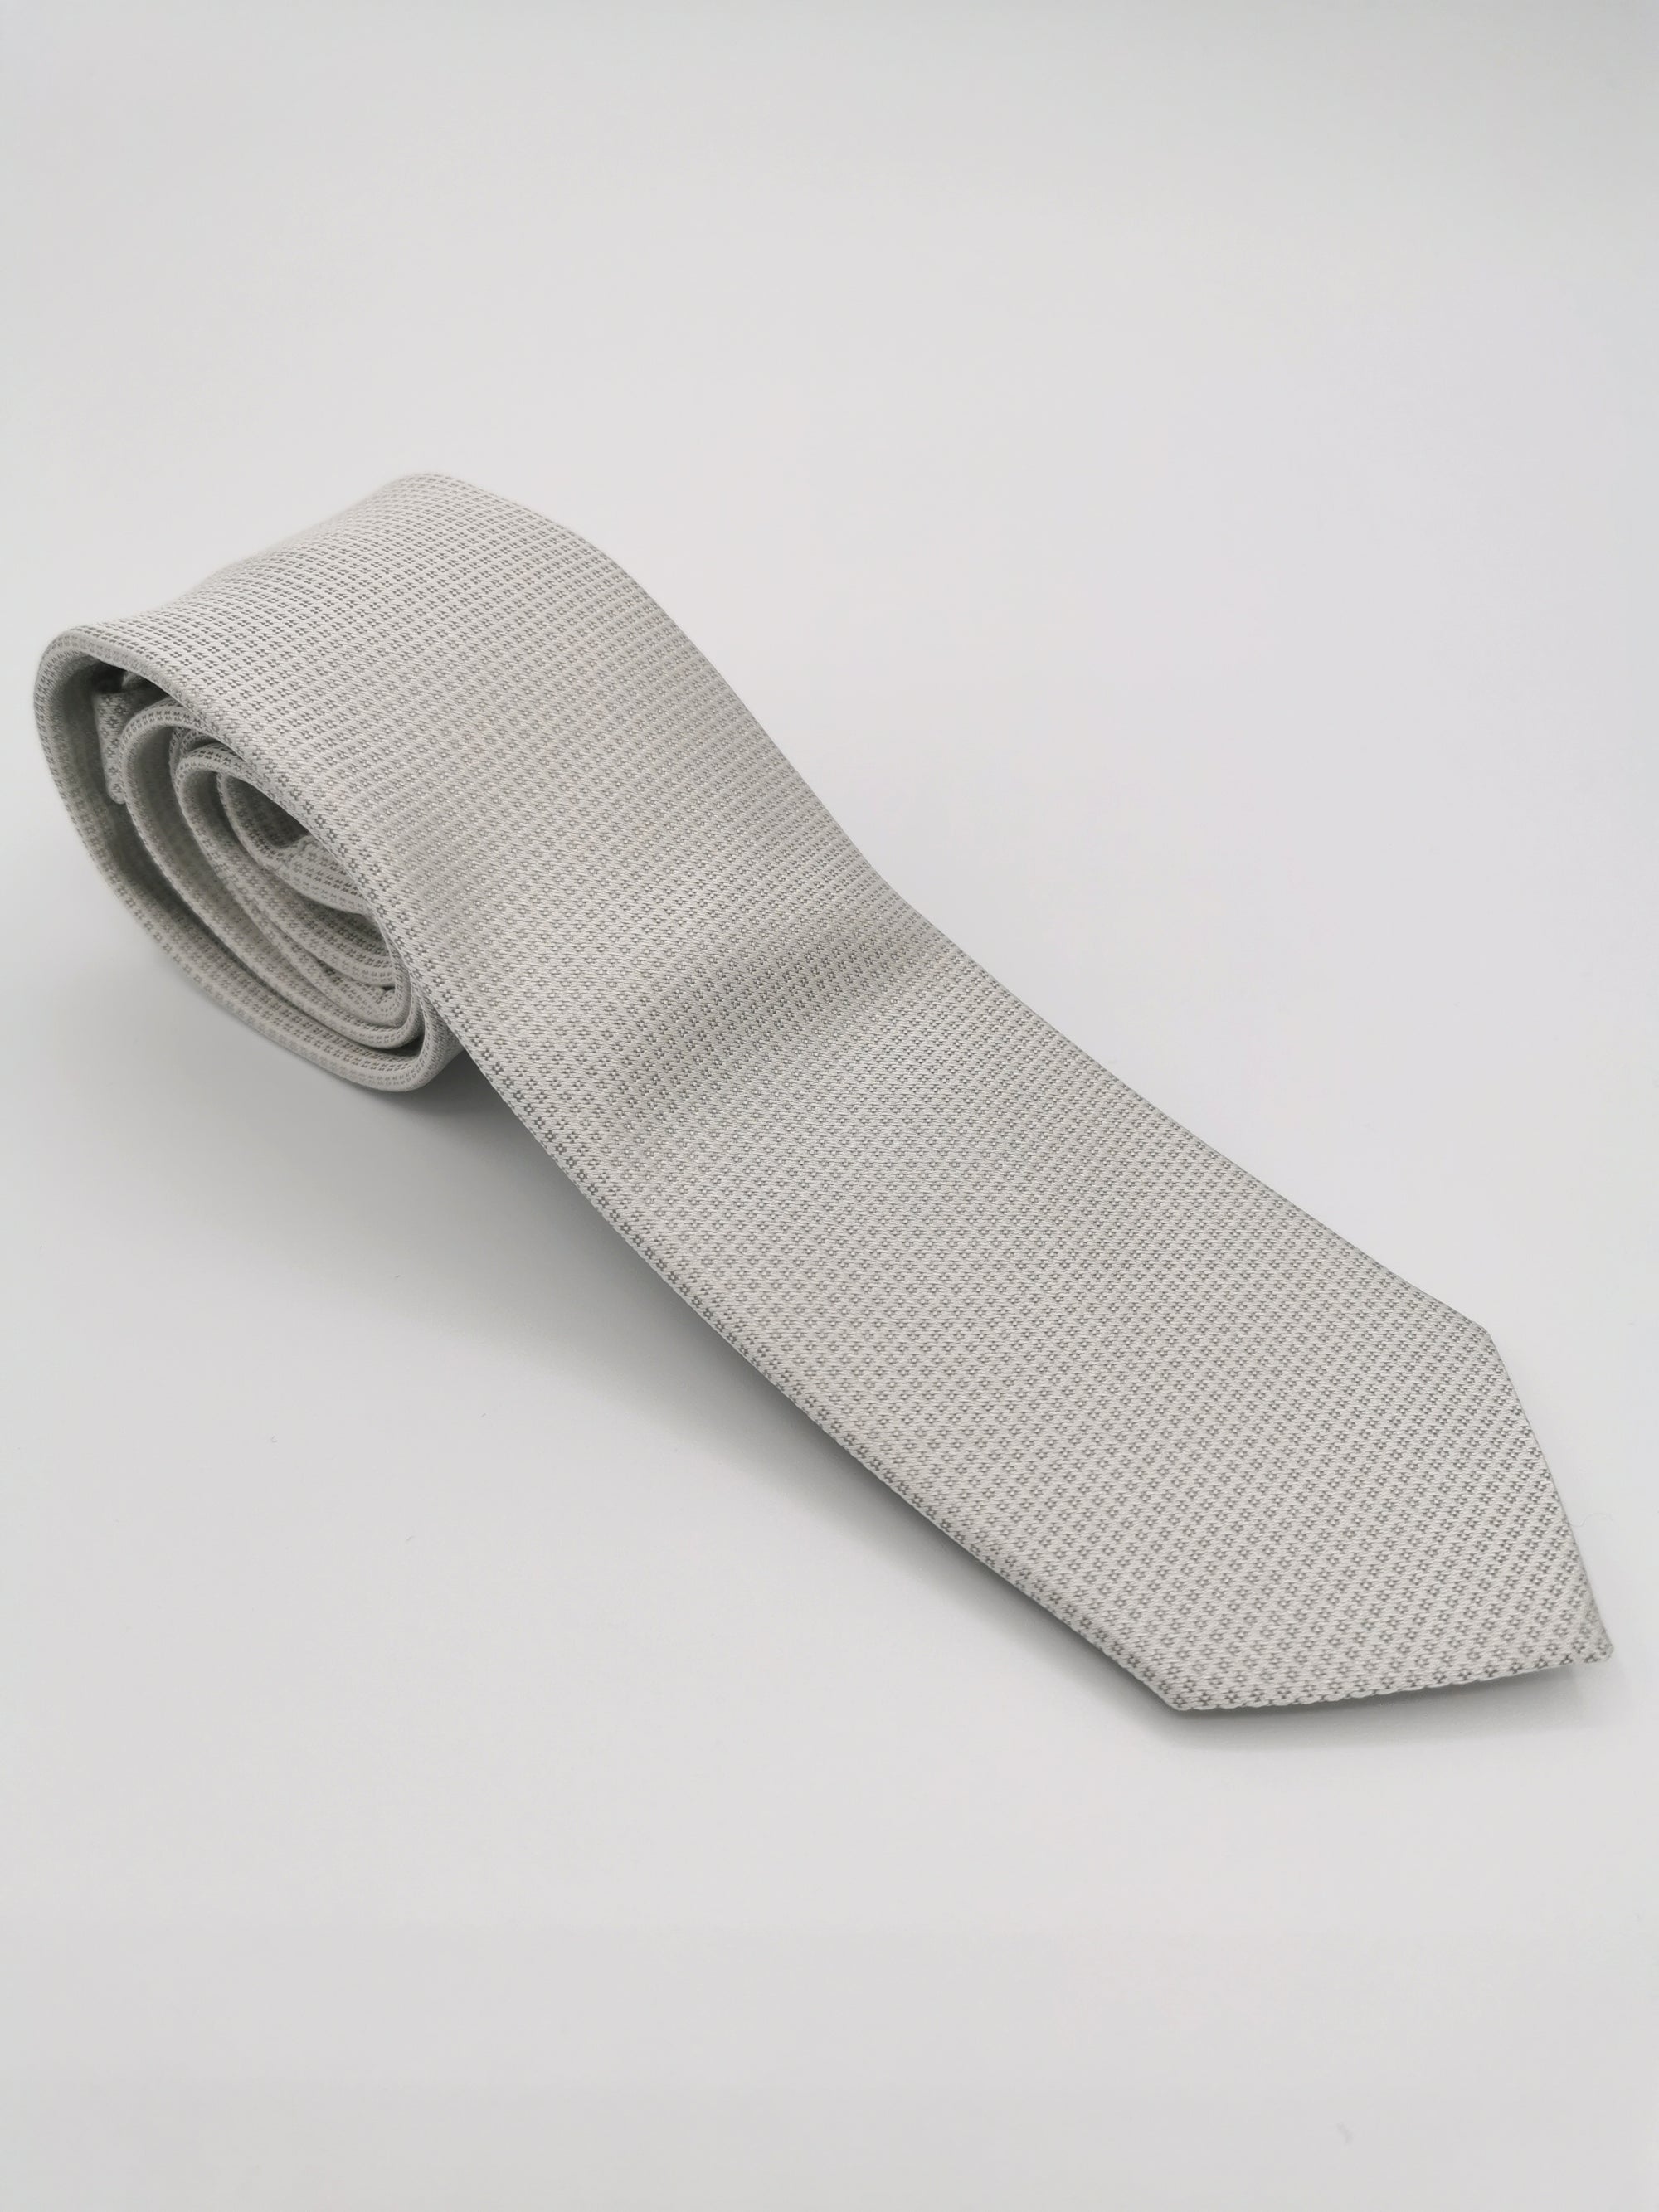 Ferala gray silk tie with small squares pattern